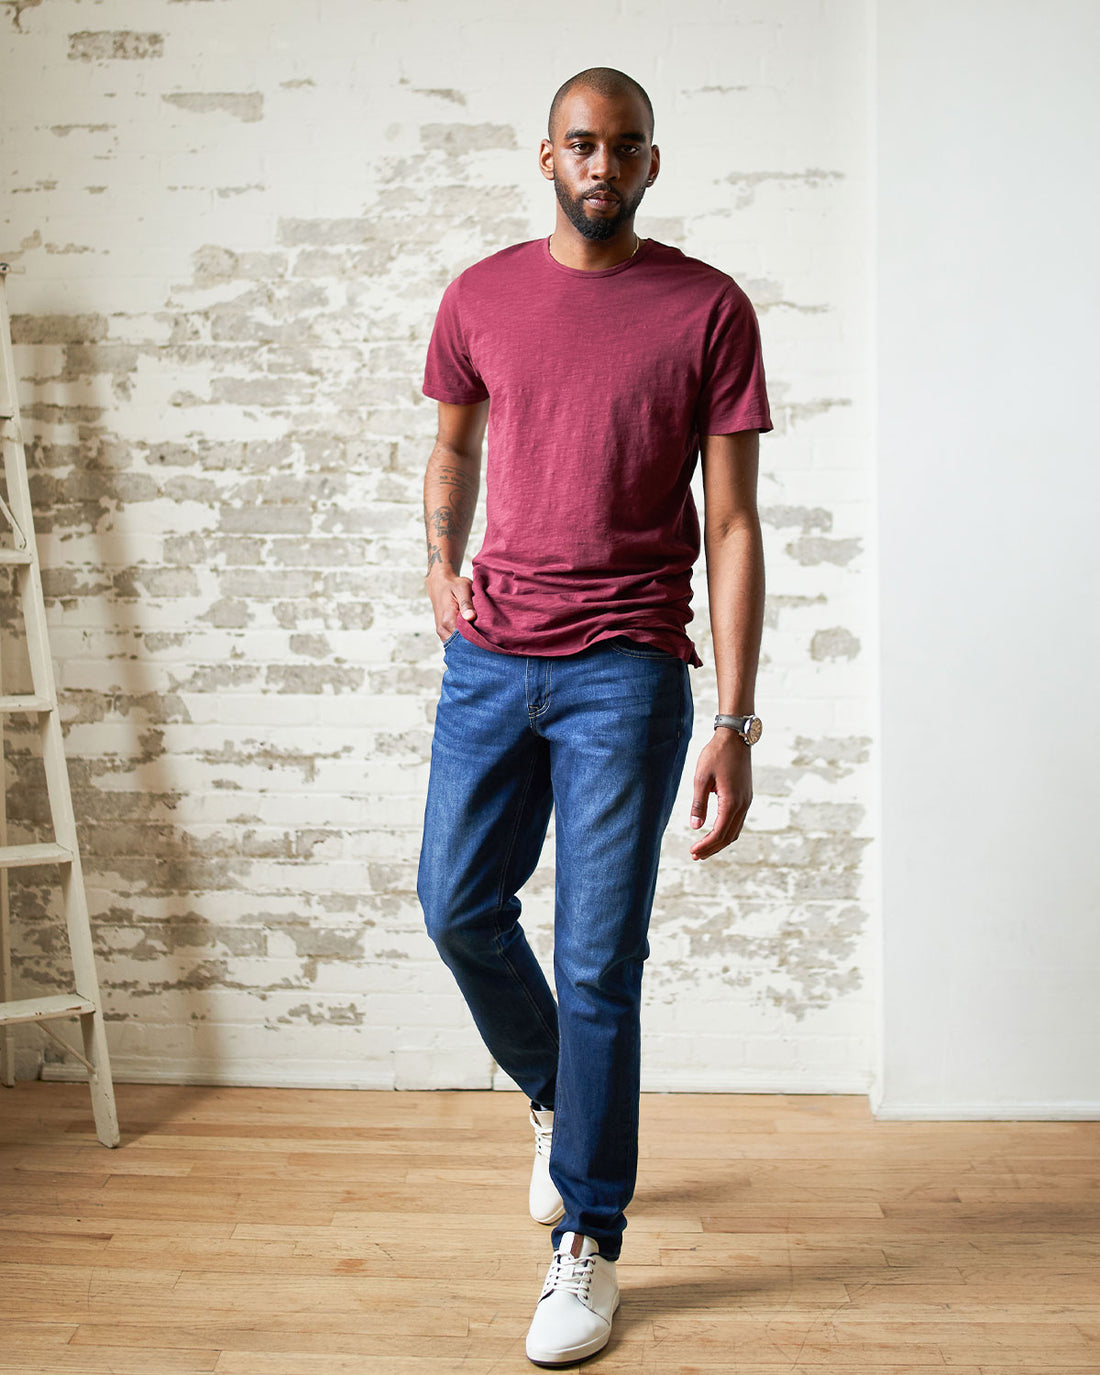 Sizing Jeans for Tall Men - Finding the Best Tall Men's Clothing